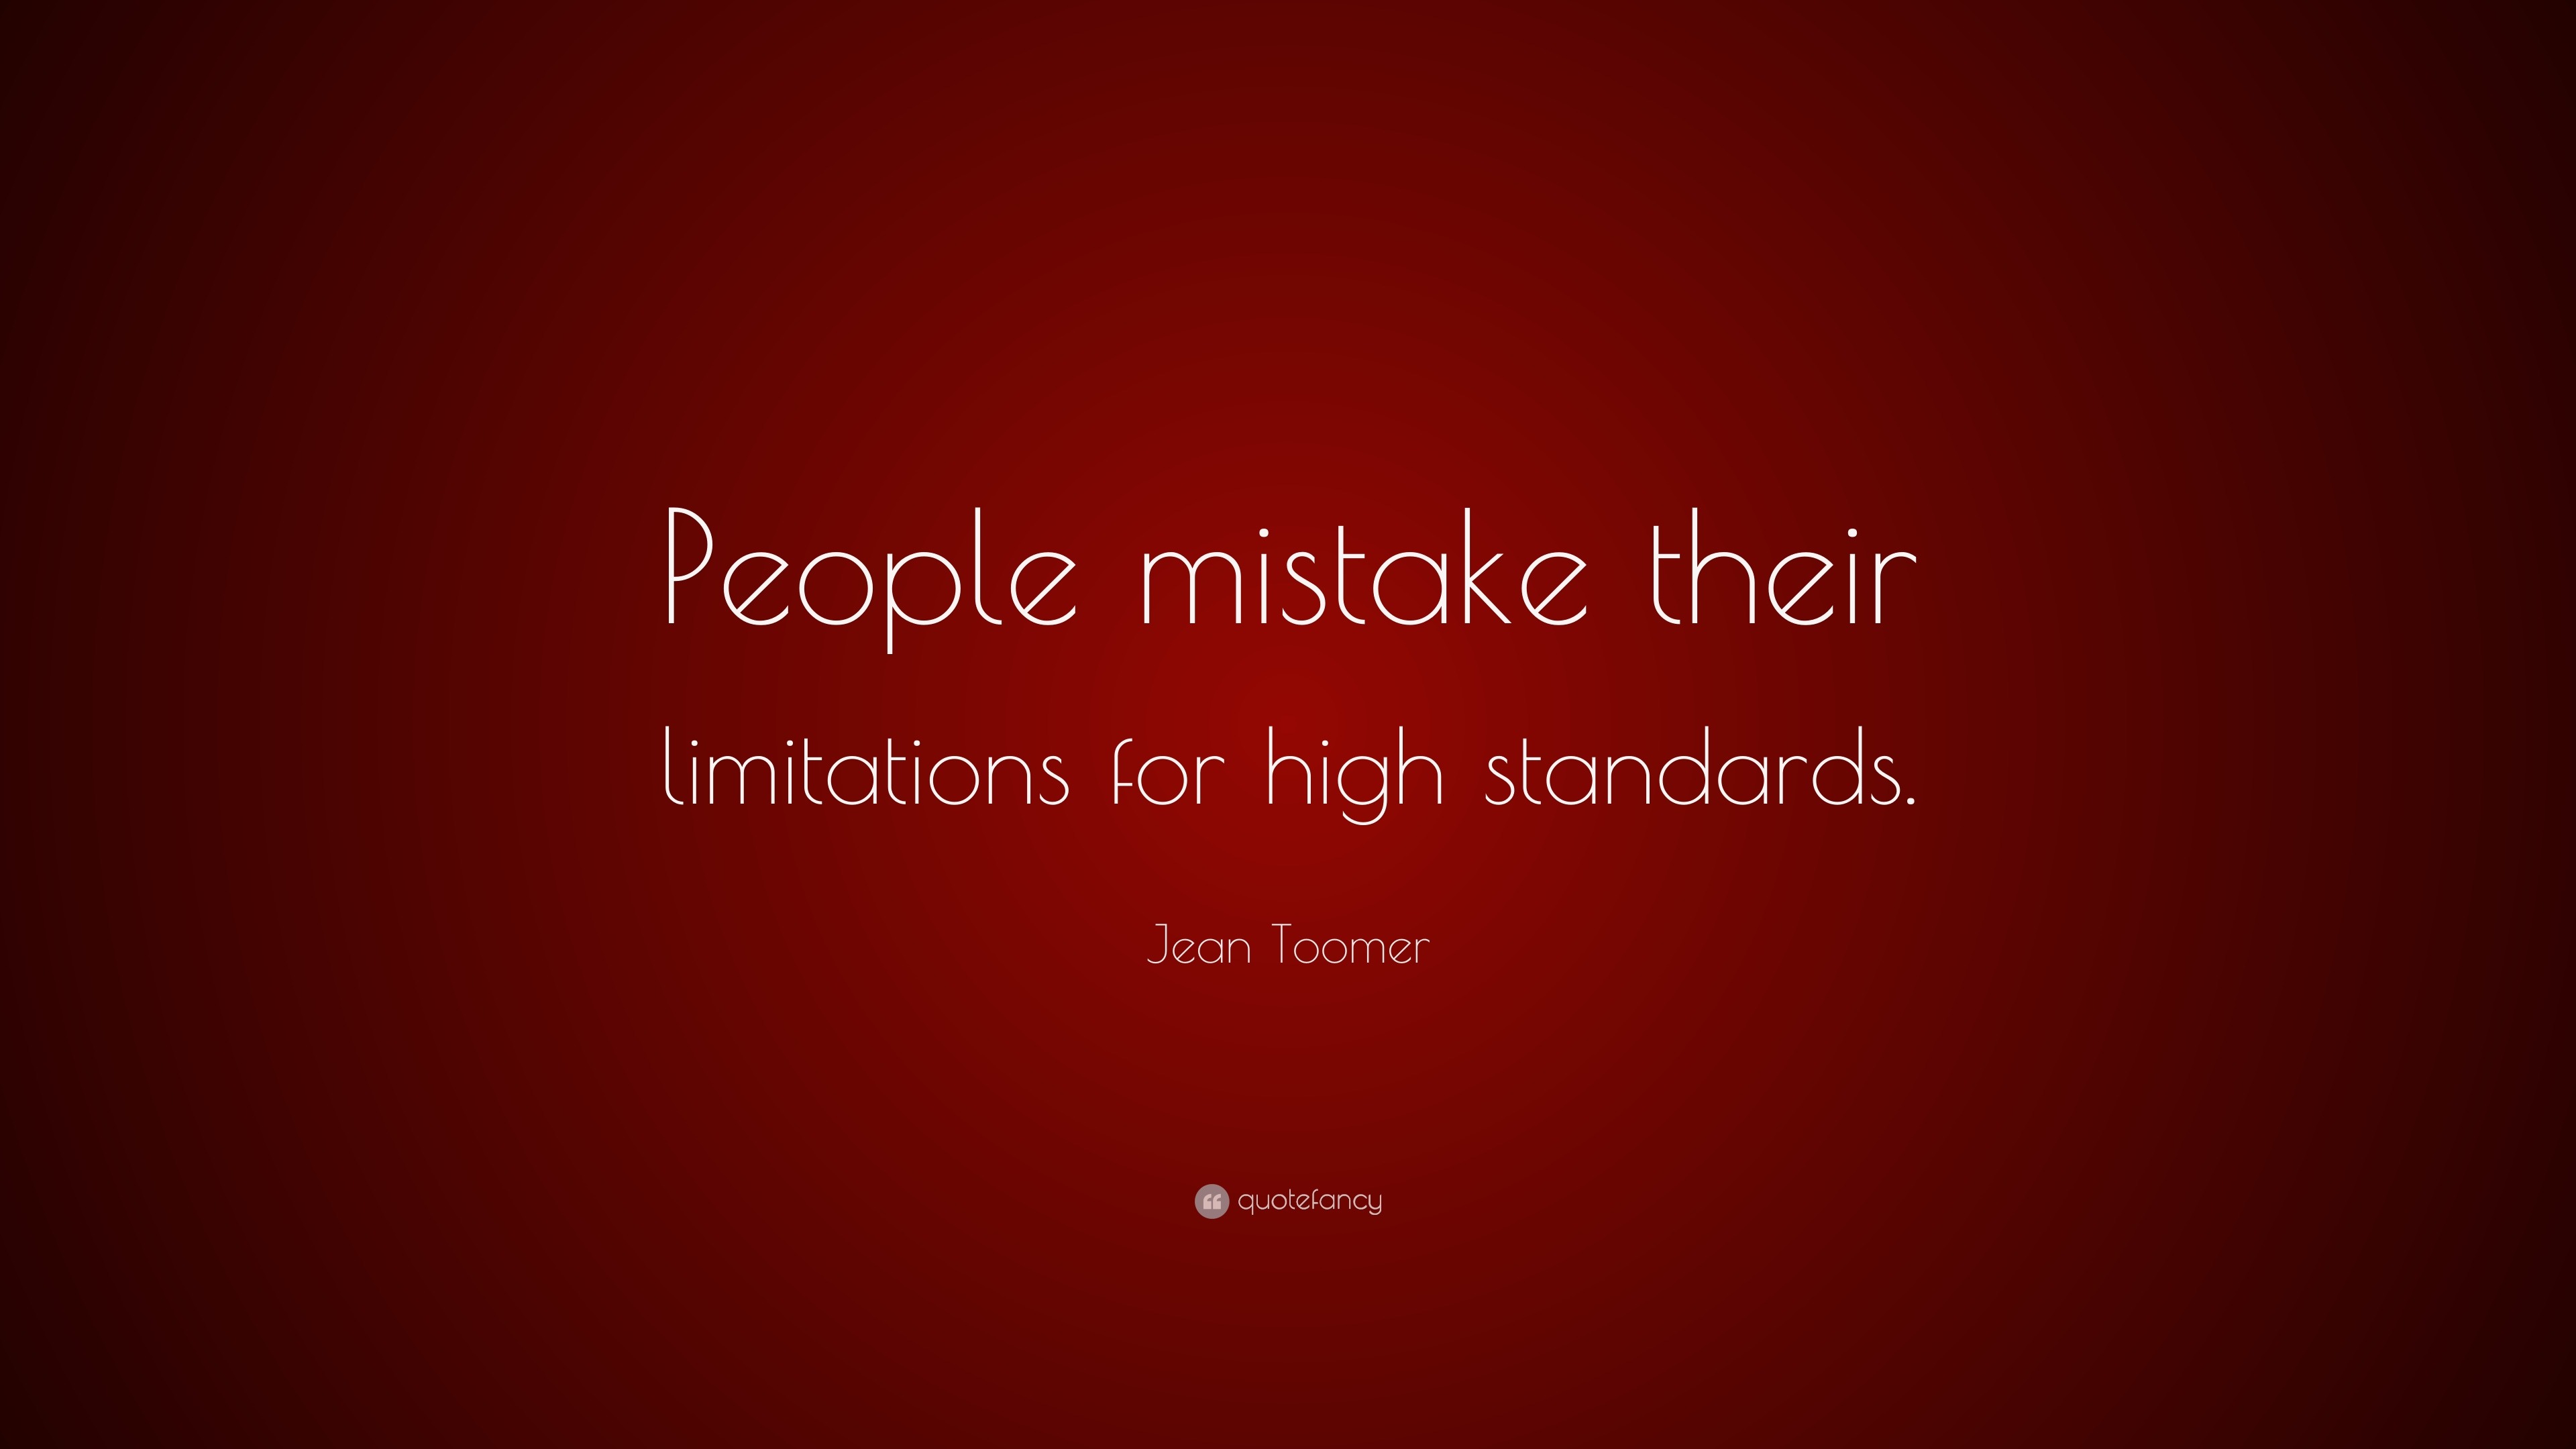 Standards quotes about having high 25 Inspirational